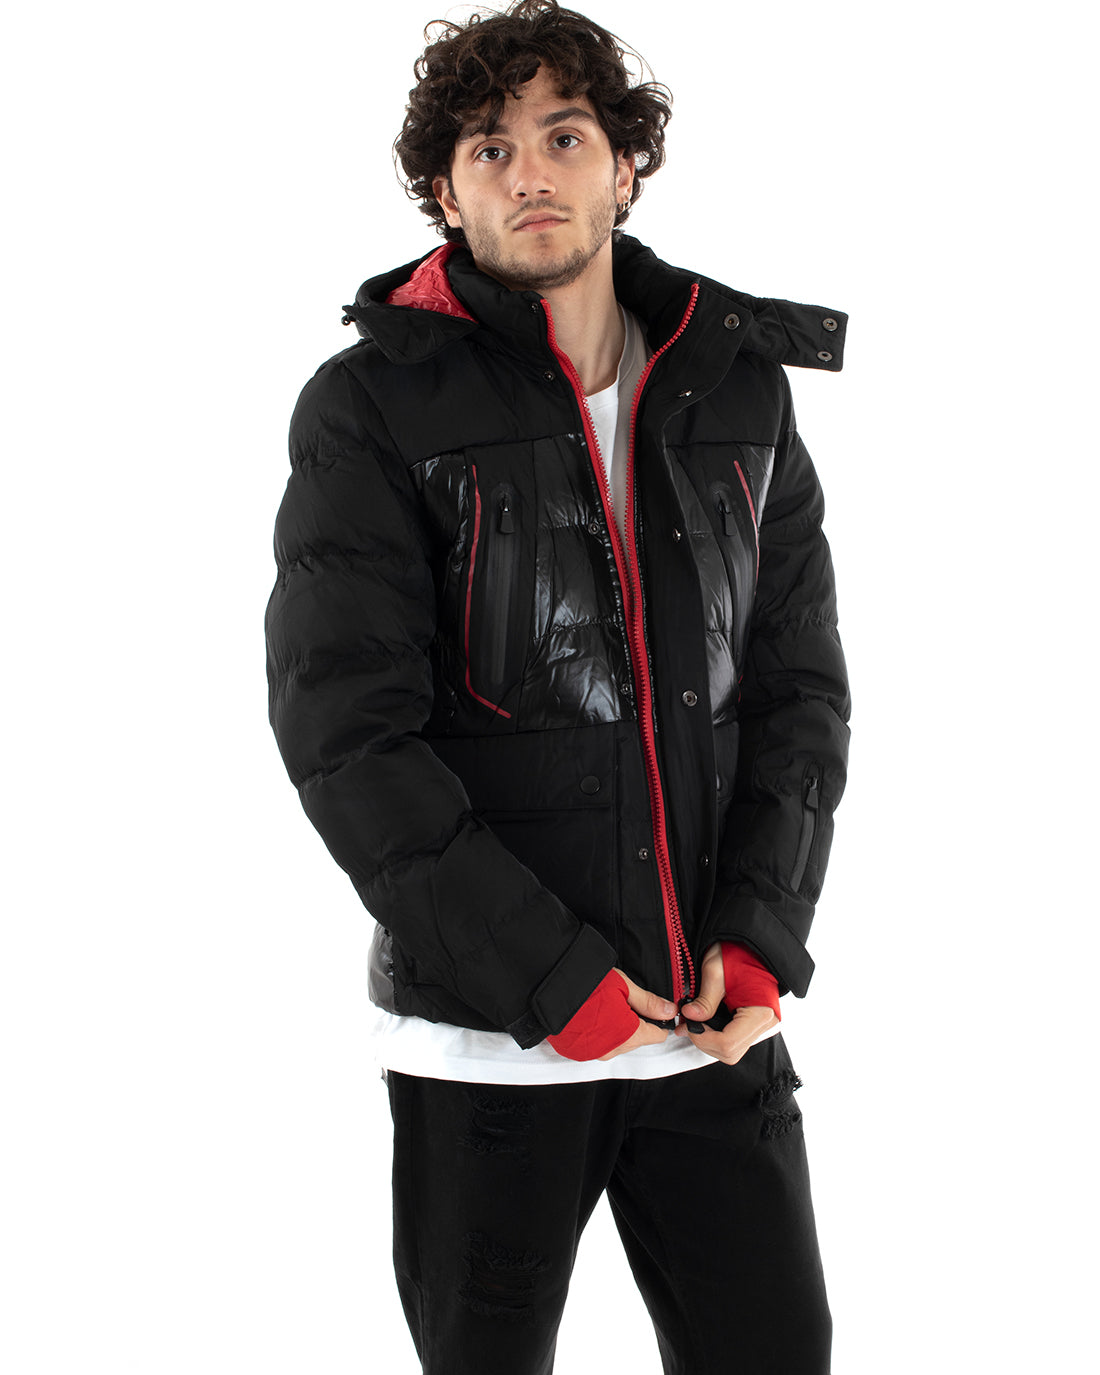 Men's Bomber Jacket Glossy Black Matte Red Solid Color Casual GIOSAL-G3010A